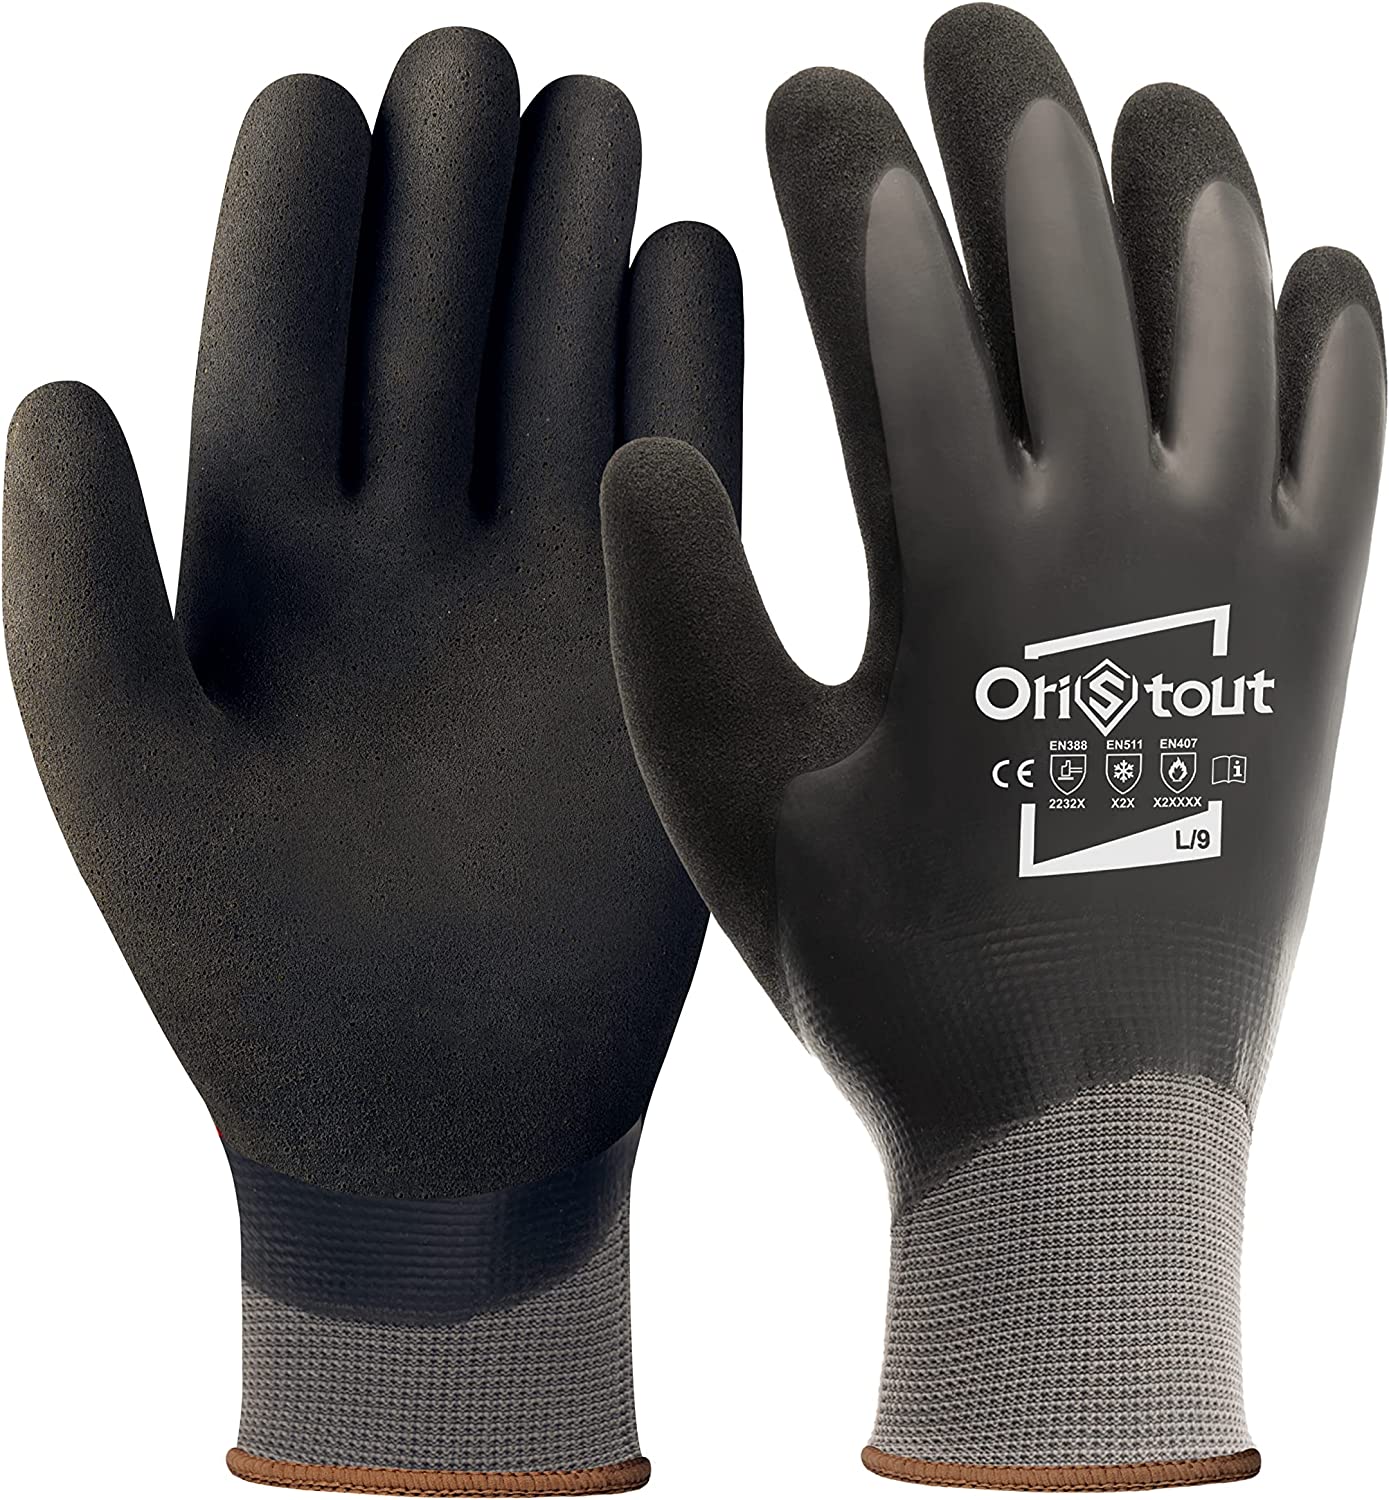 OriStout Waterproof Winter Work Gloves for Men and Women, Touchscreen, Freezer Gloves, Thermal Insulated, for Cold Weather